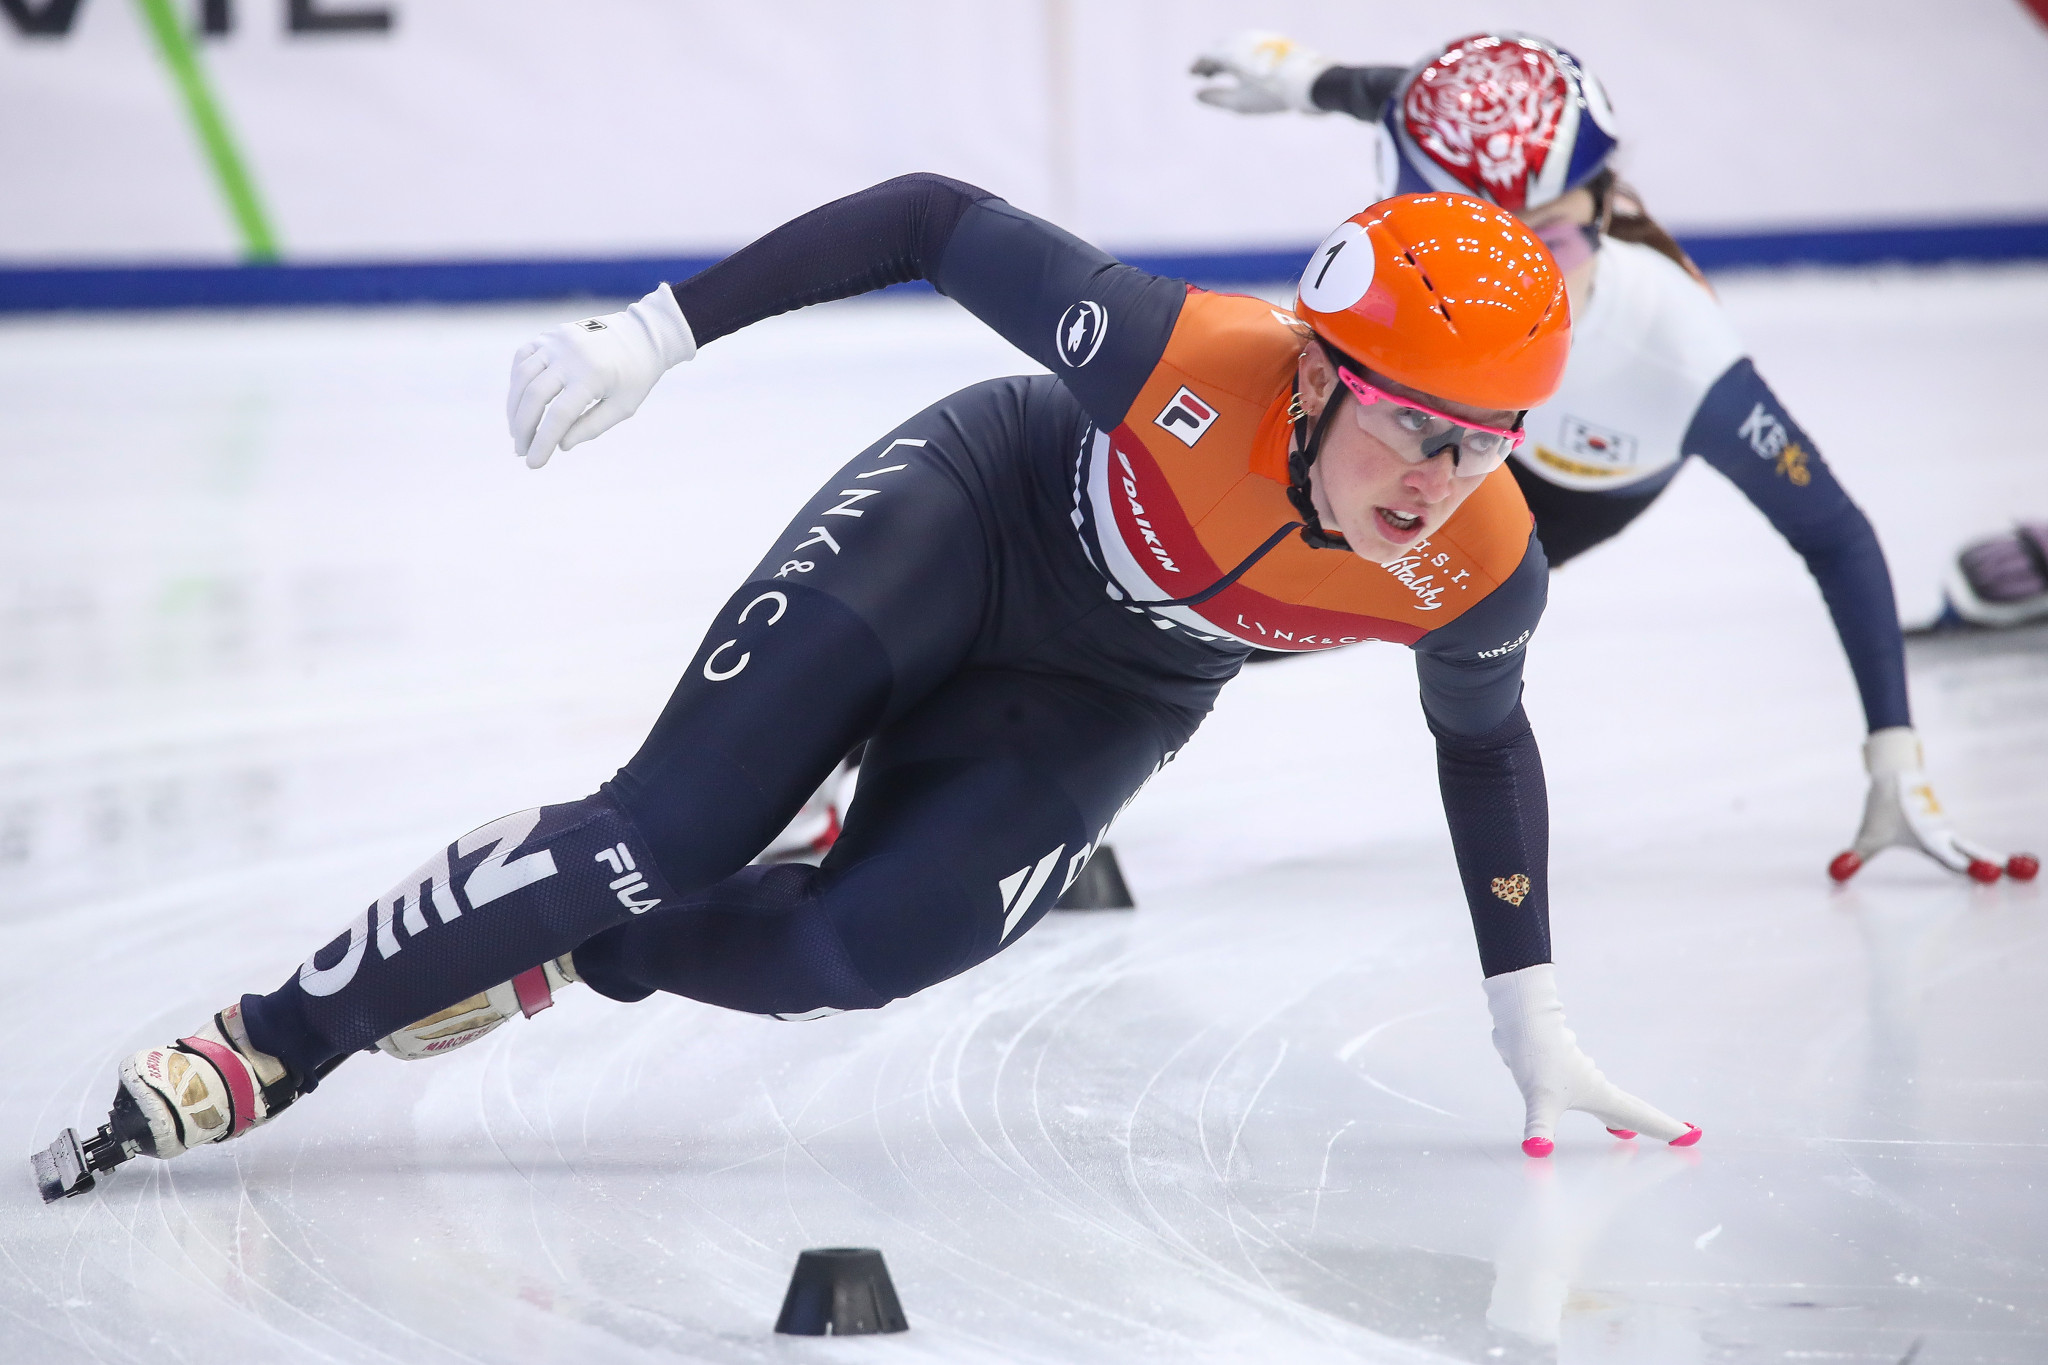 Schulting starts strongly at ISU Short Track Speed Skating World Cup in Debrecen